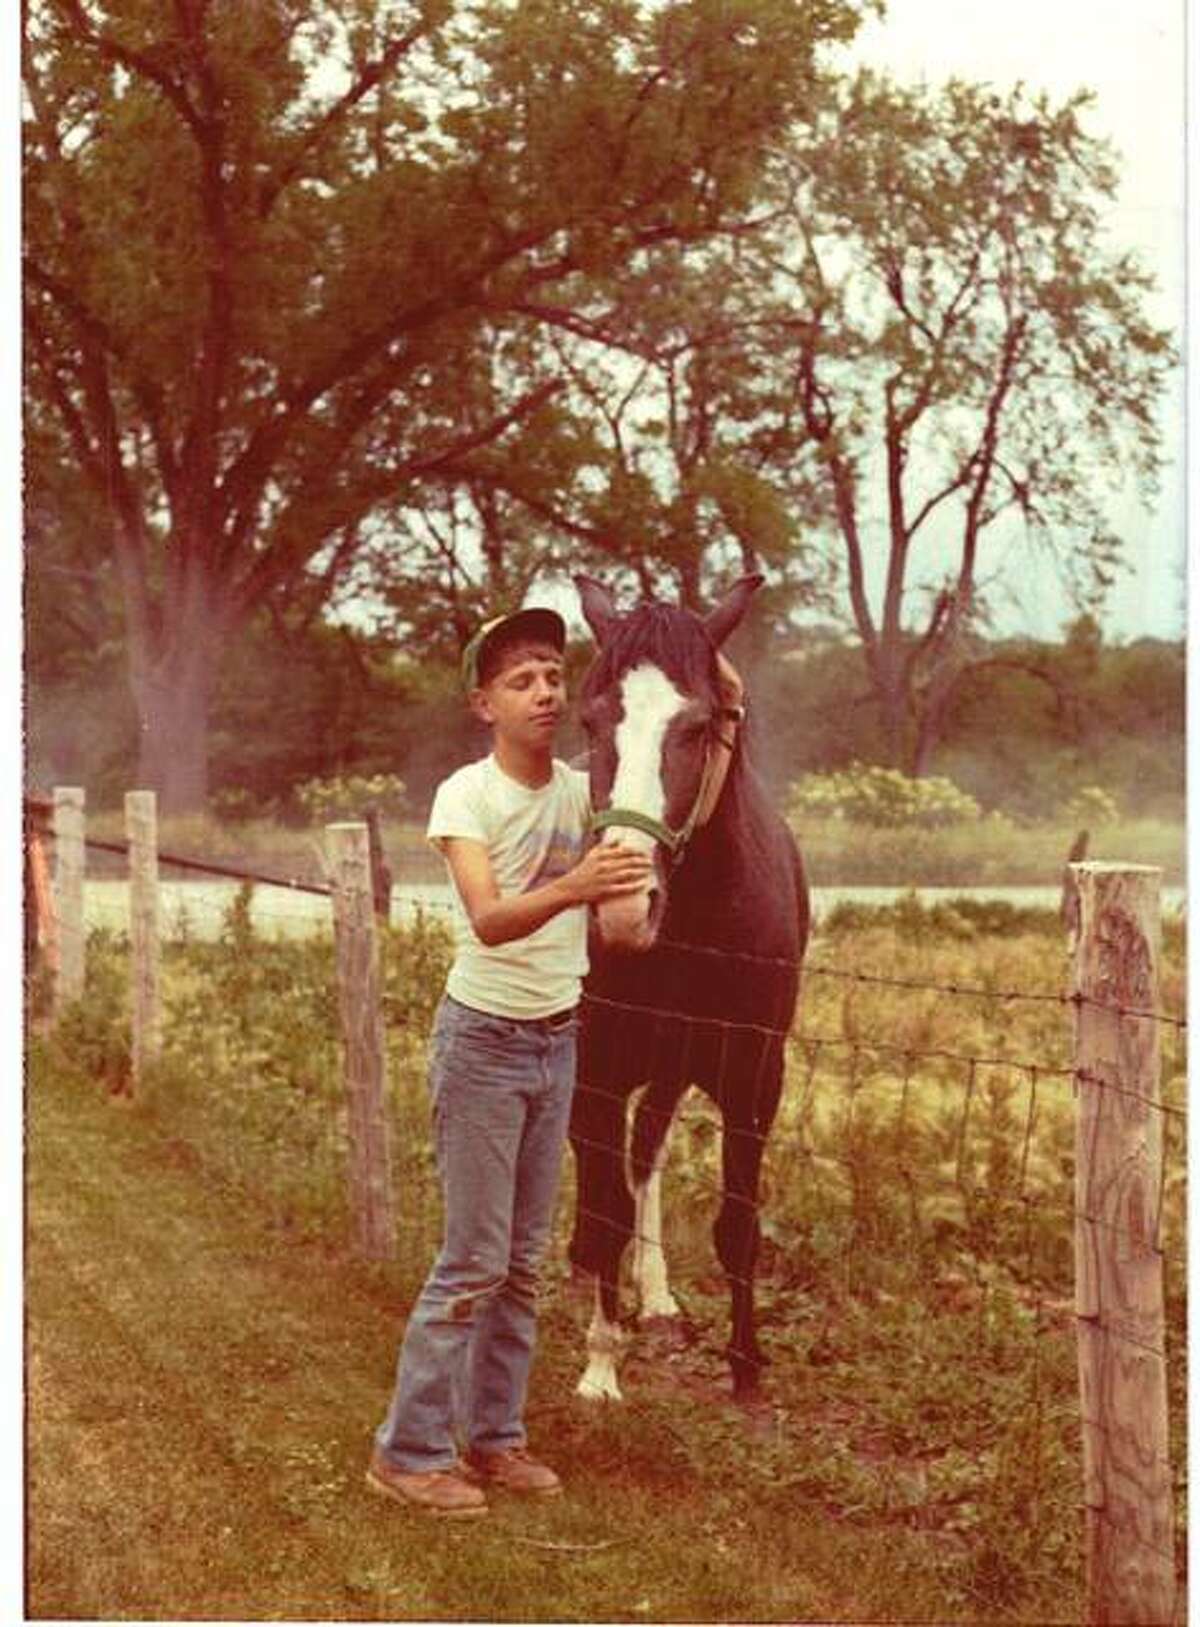 A young Scott Reeder is pictured with his horse, Ramona, named after the popular Beverly Cleary character.